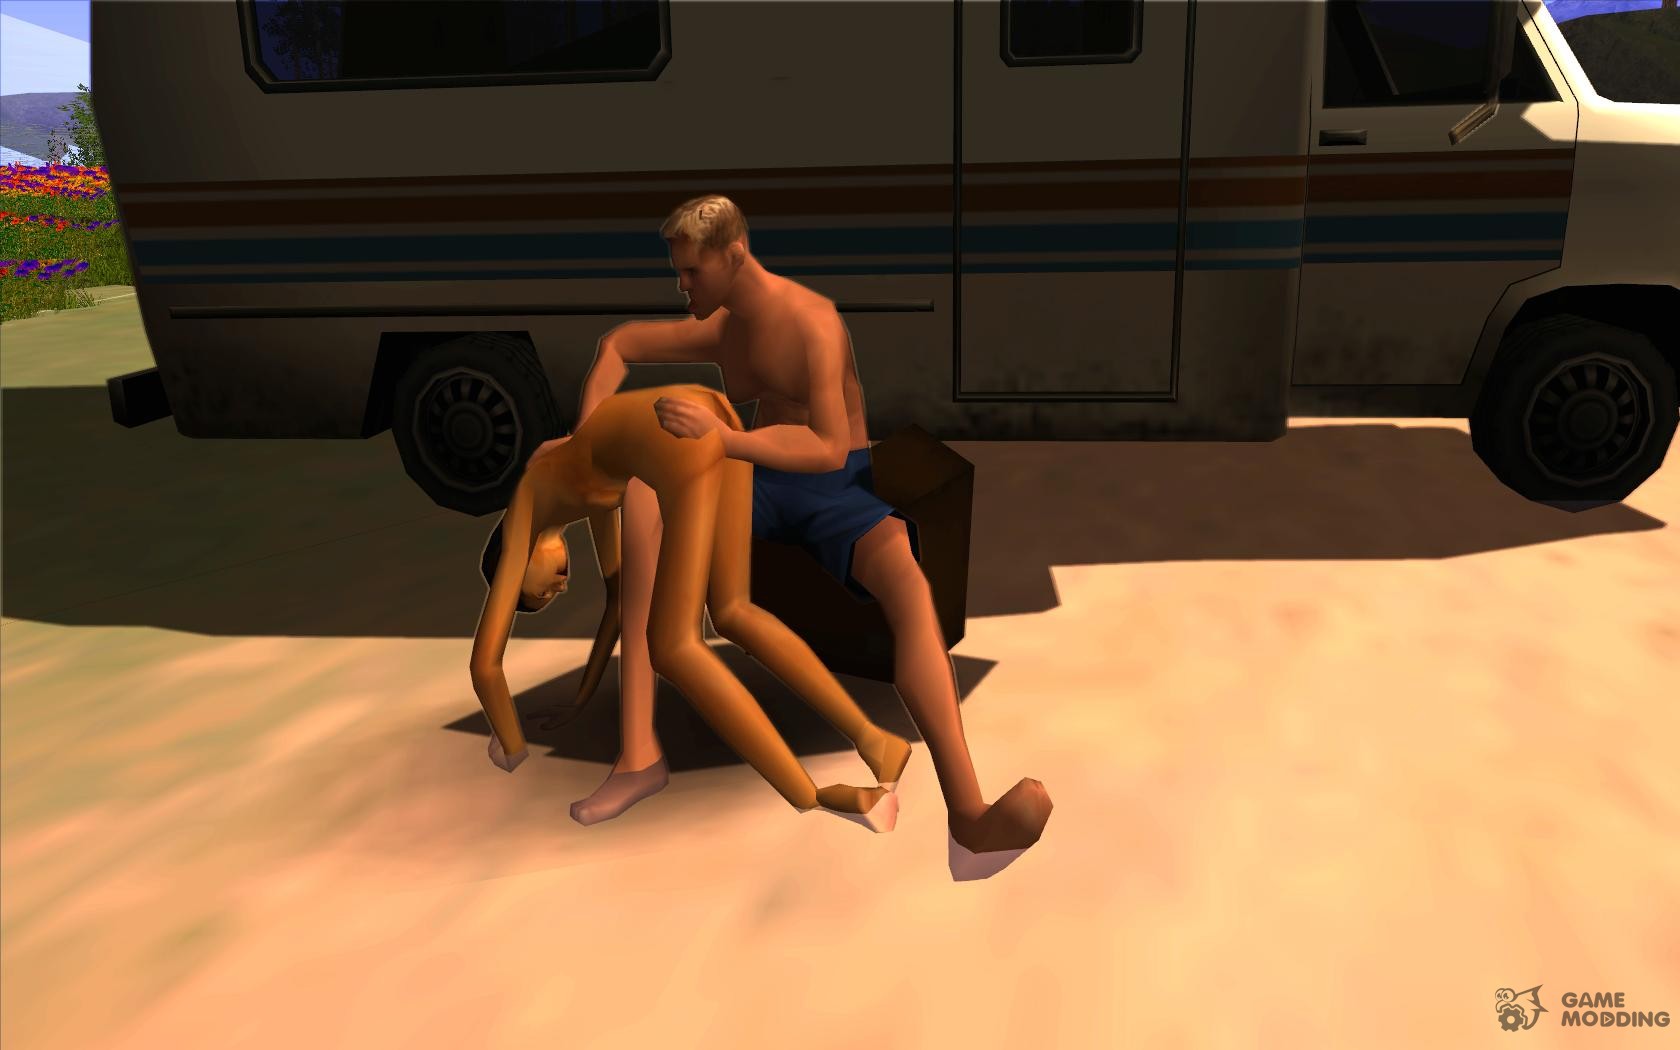 To get the maximum oif sex appeal in grand theft auto san andreas on pc, yo...